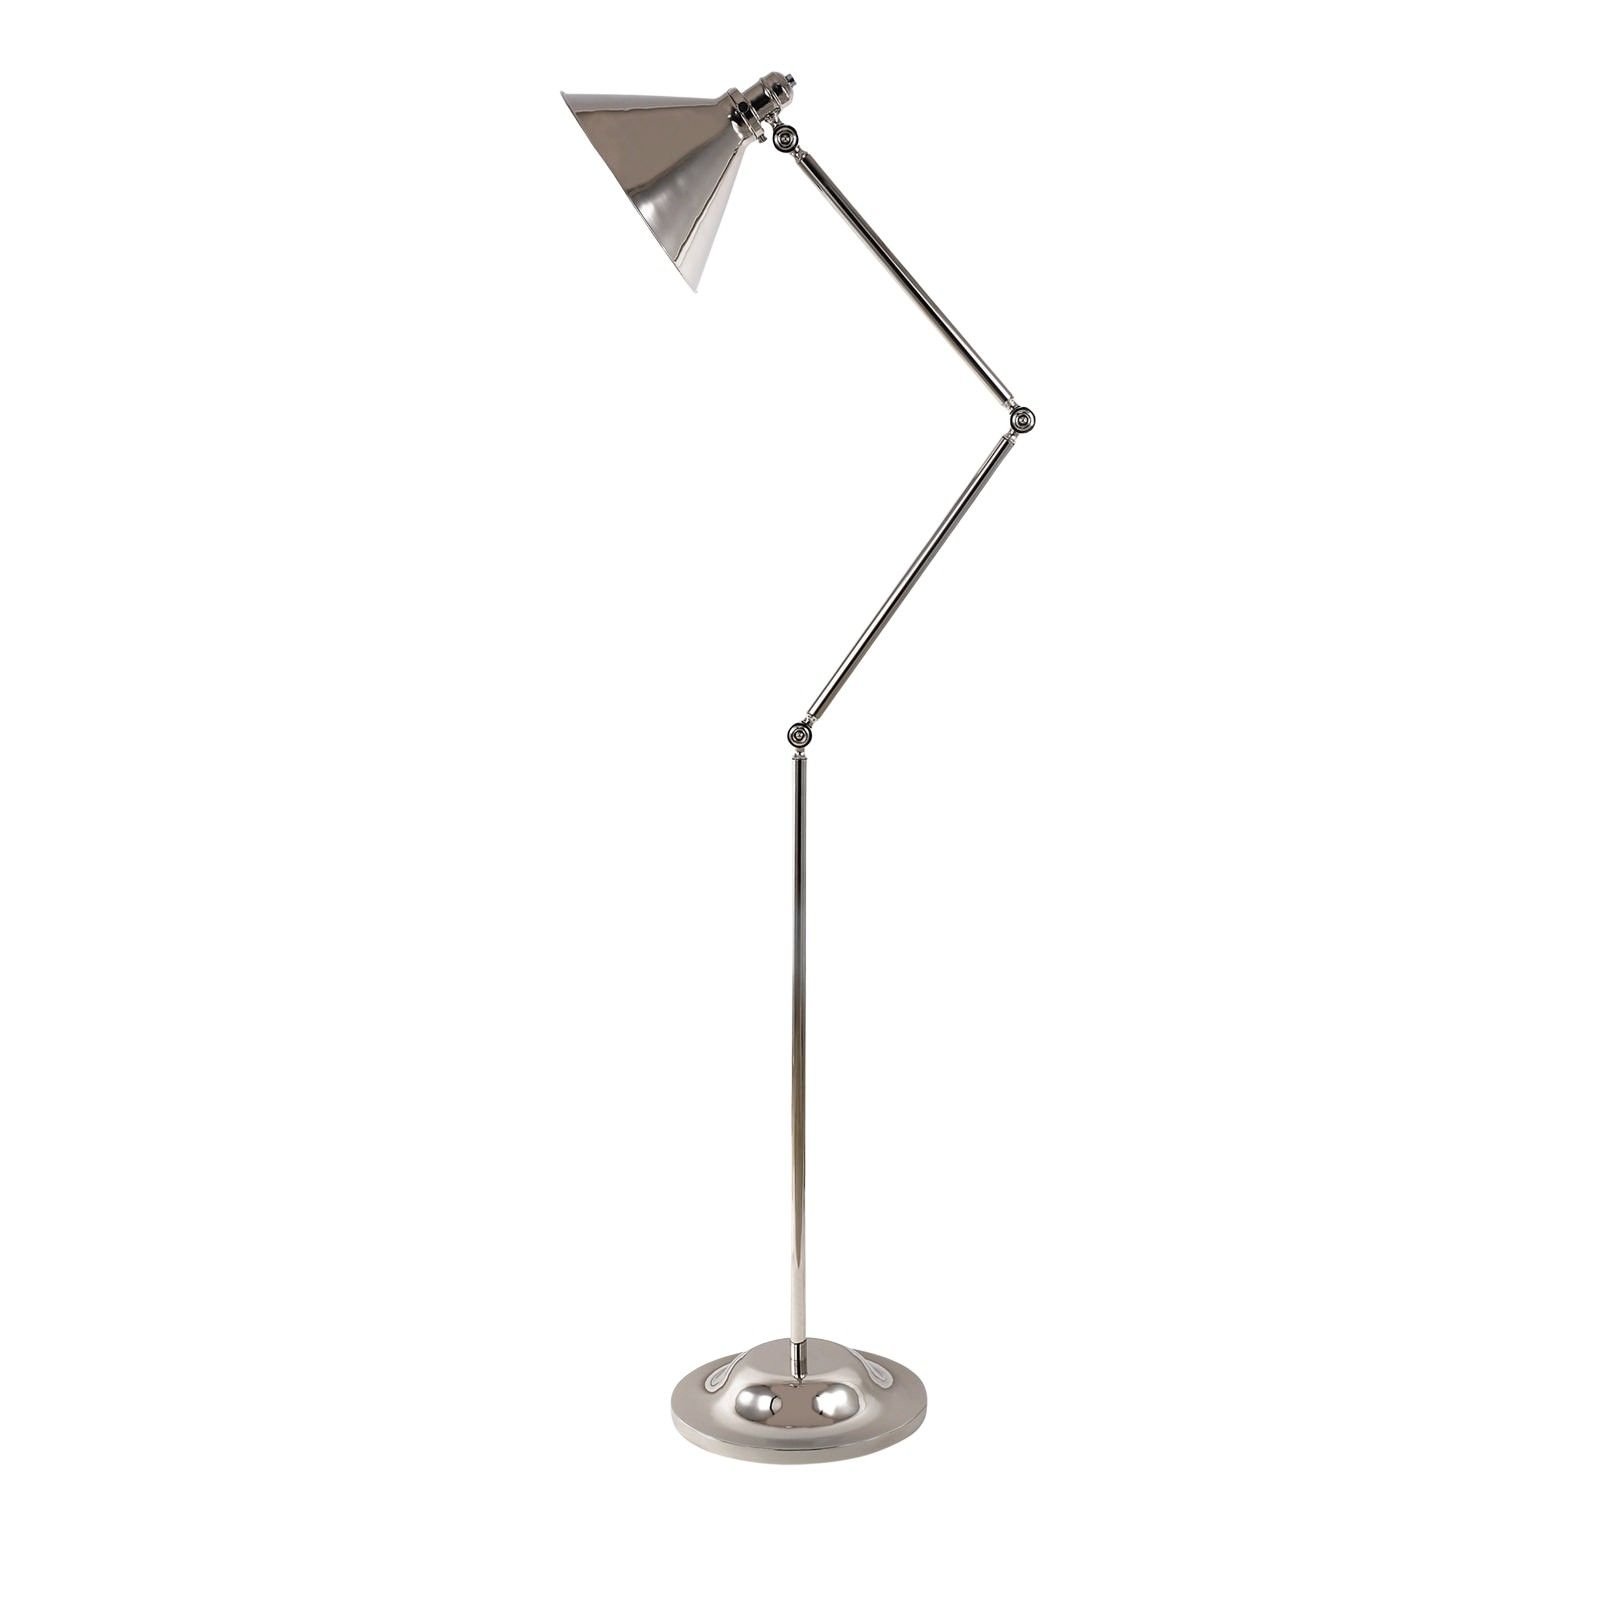 Provence floor lamp in Polished Nickel